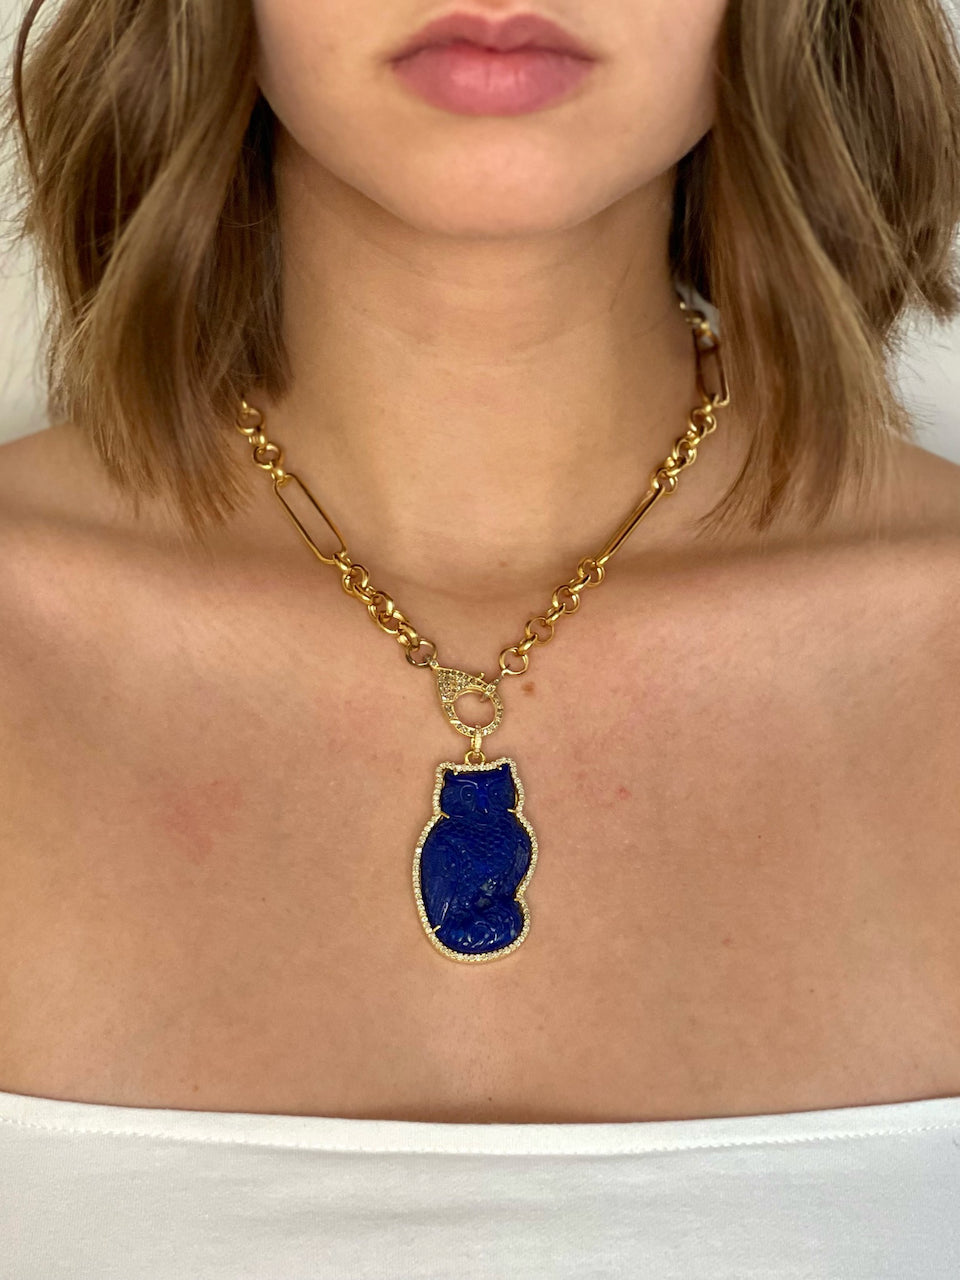 Carved Lapis Owl Set in Pave Diamonds in 22kt Gold over Brass